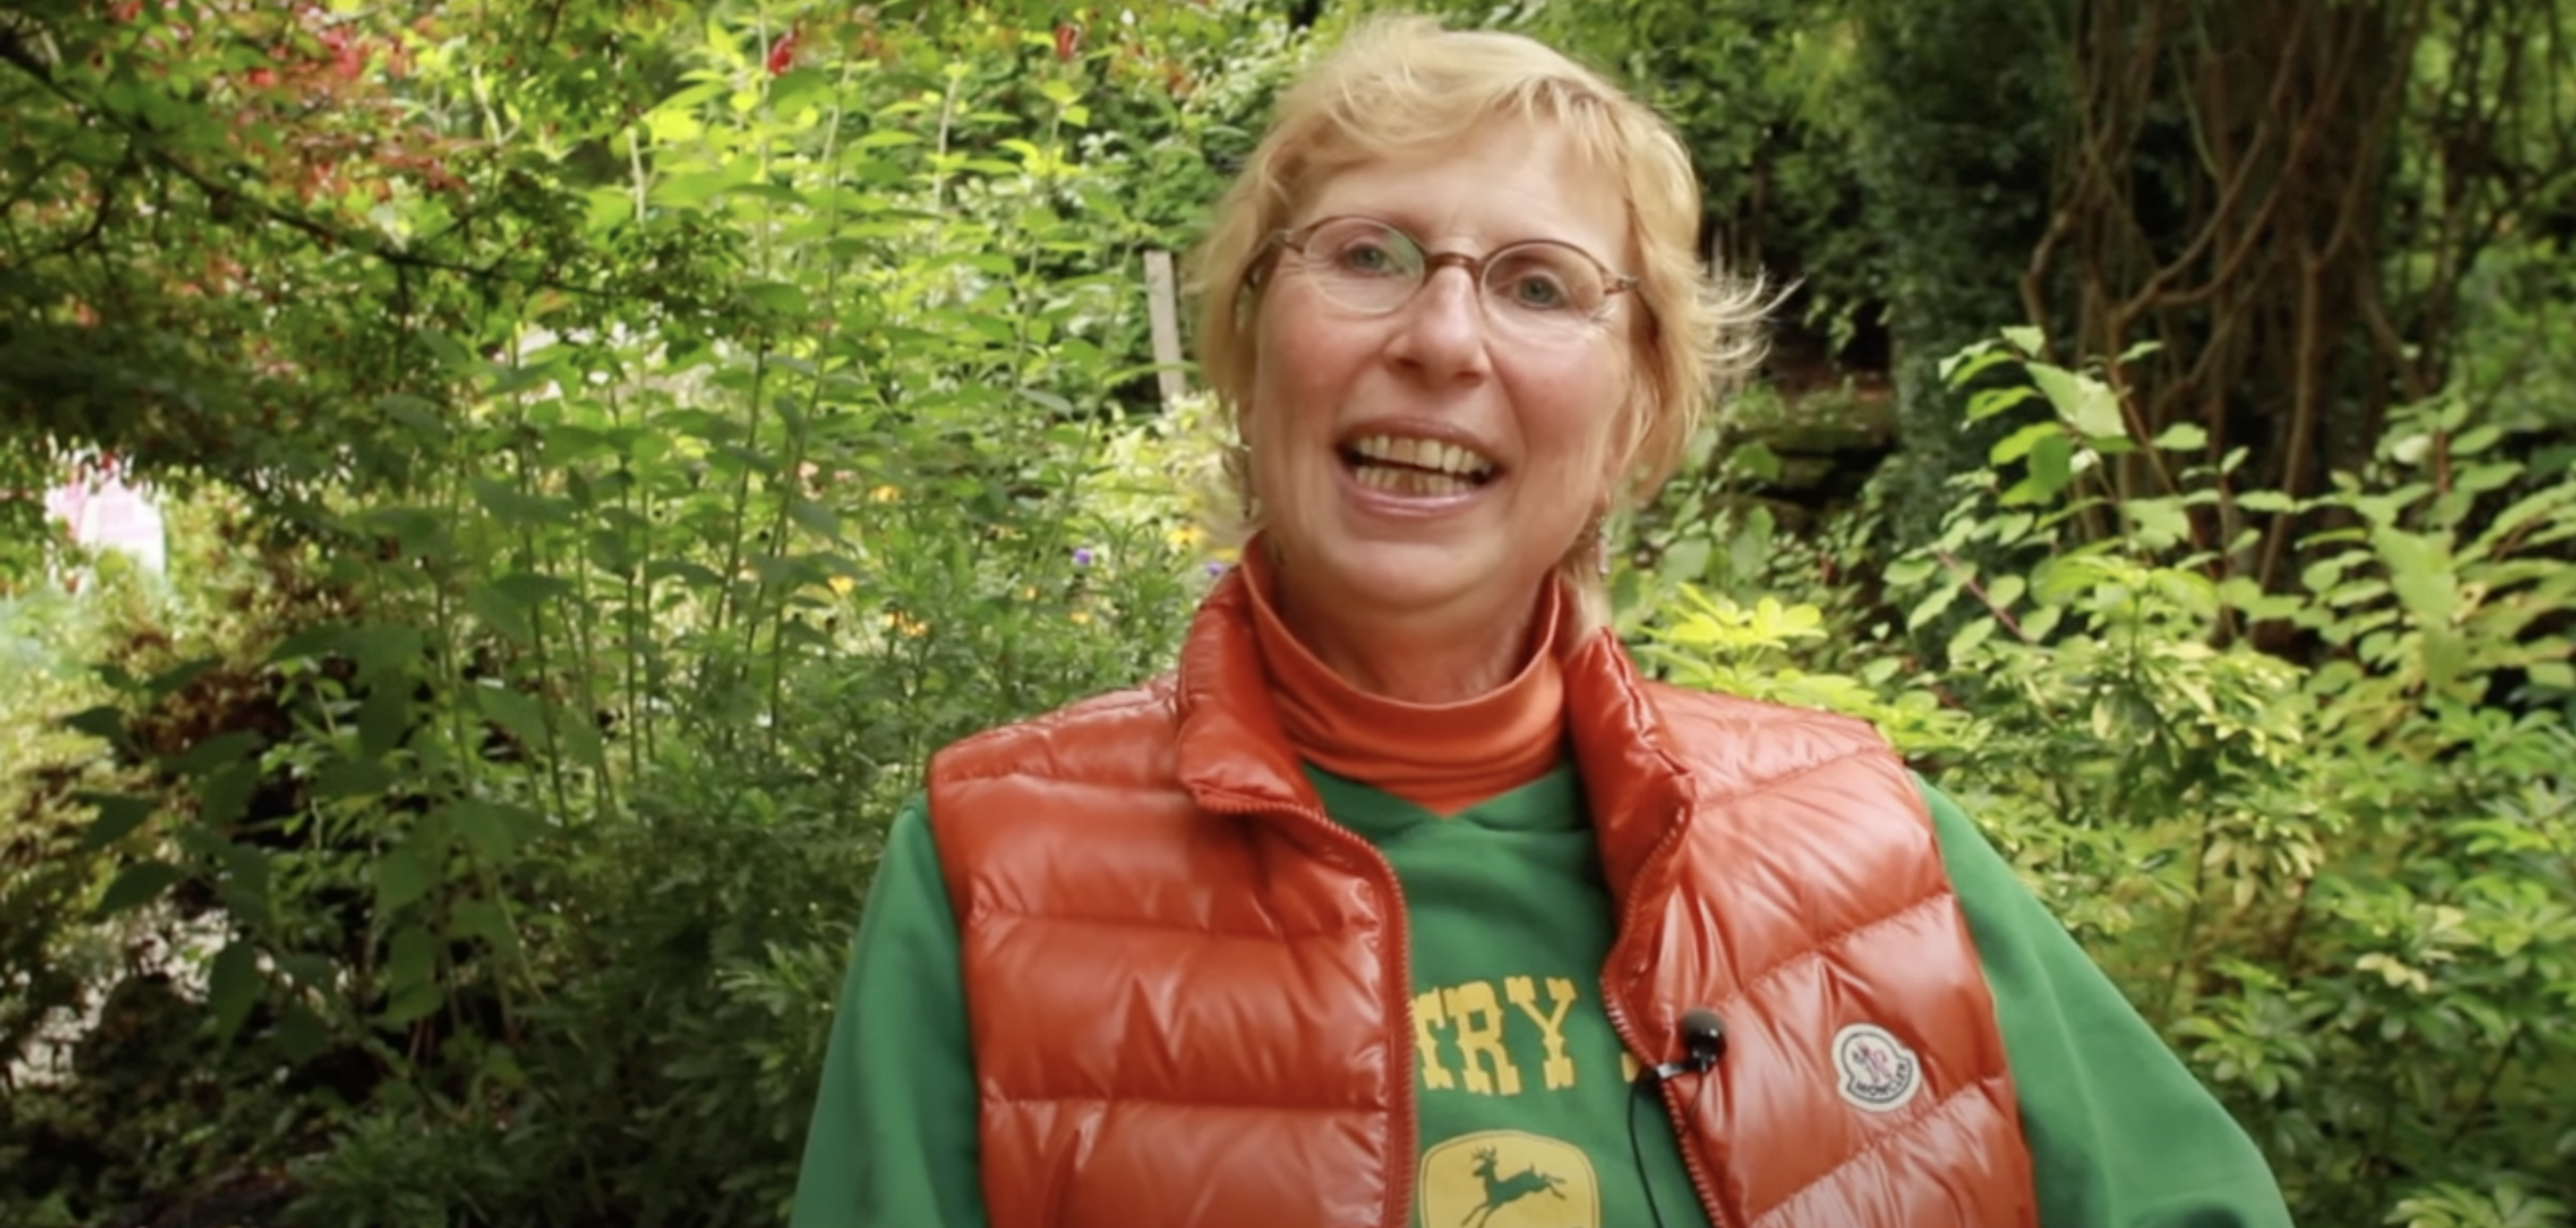 A White woman with short blond hair wearing a green t-shirt and orange sleeveless jacket sitting in front of some bushes.